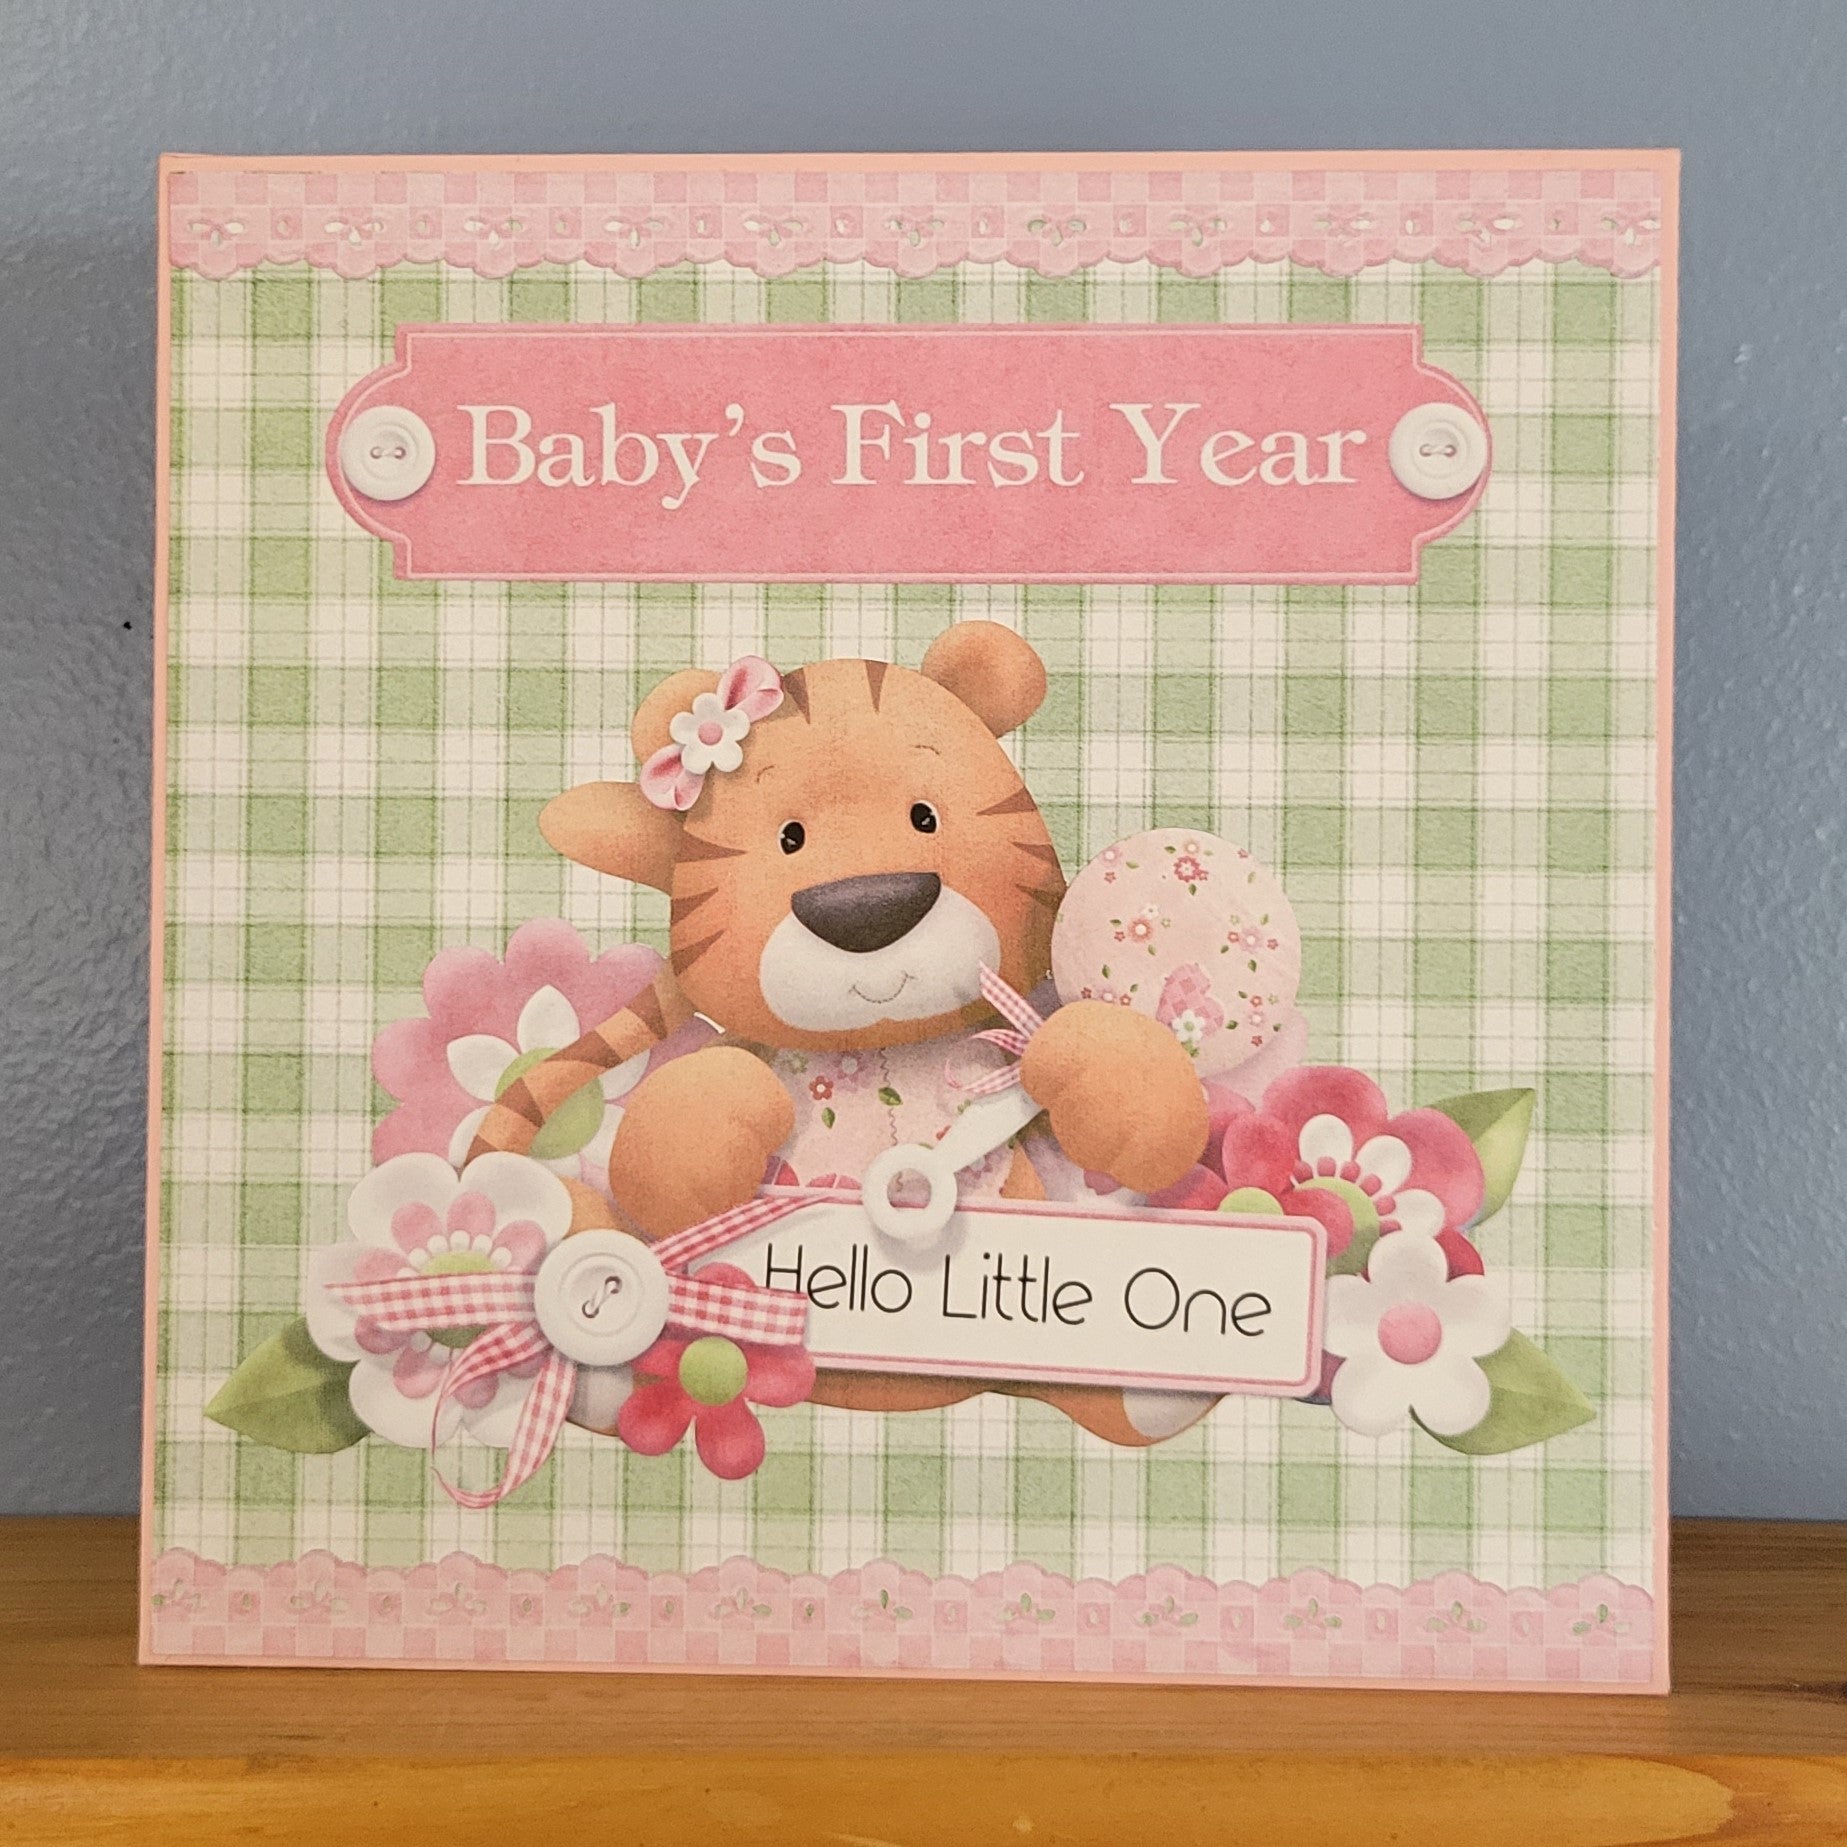 Baby's First Year Girl front cover.